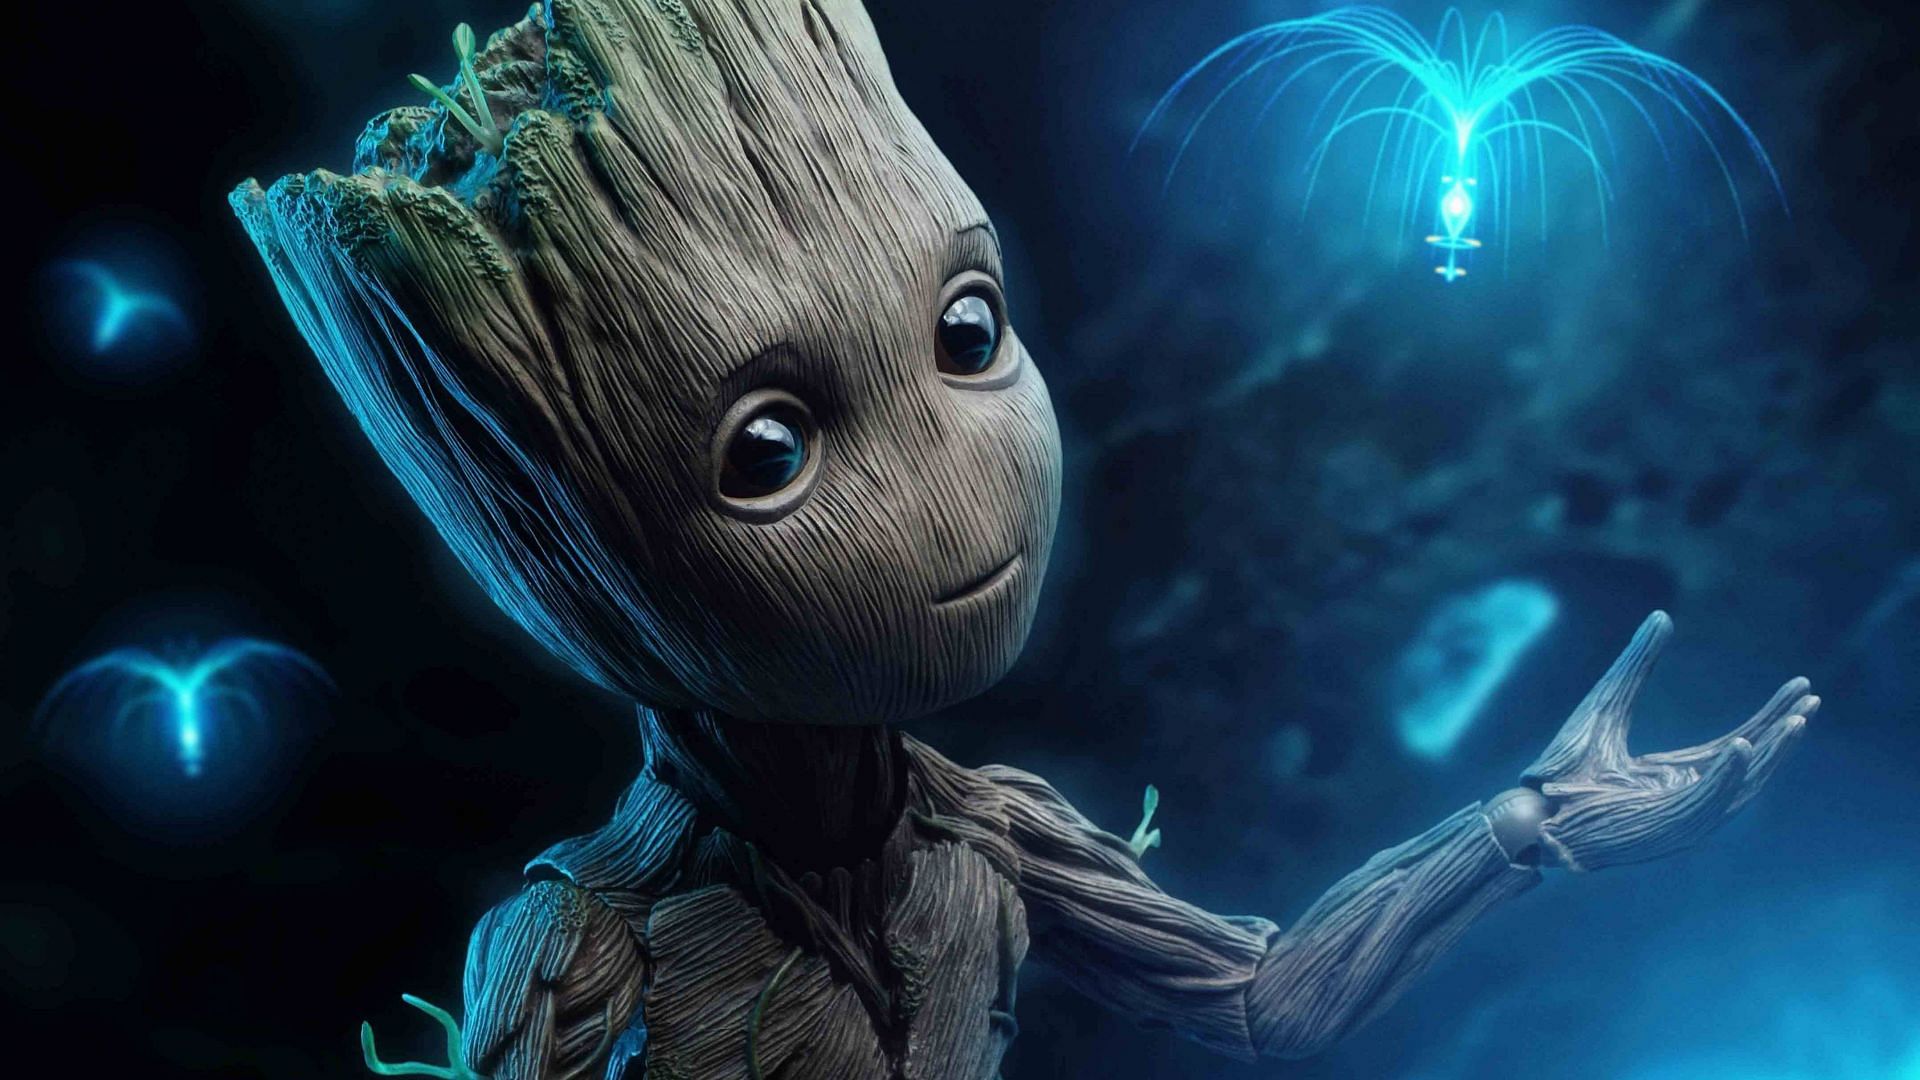 The visual effects in the movie The Guardians of the Galaxy were stunning. (Image Via Marvel)